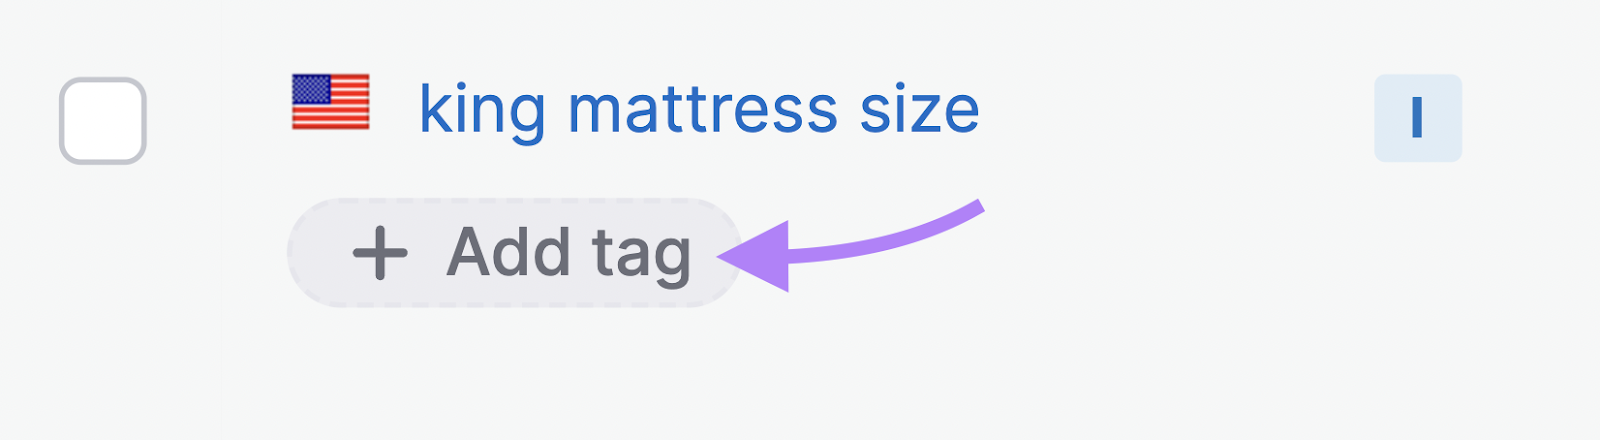 “+ Add tag” button in Keyword Manager